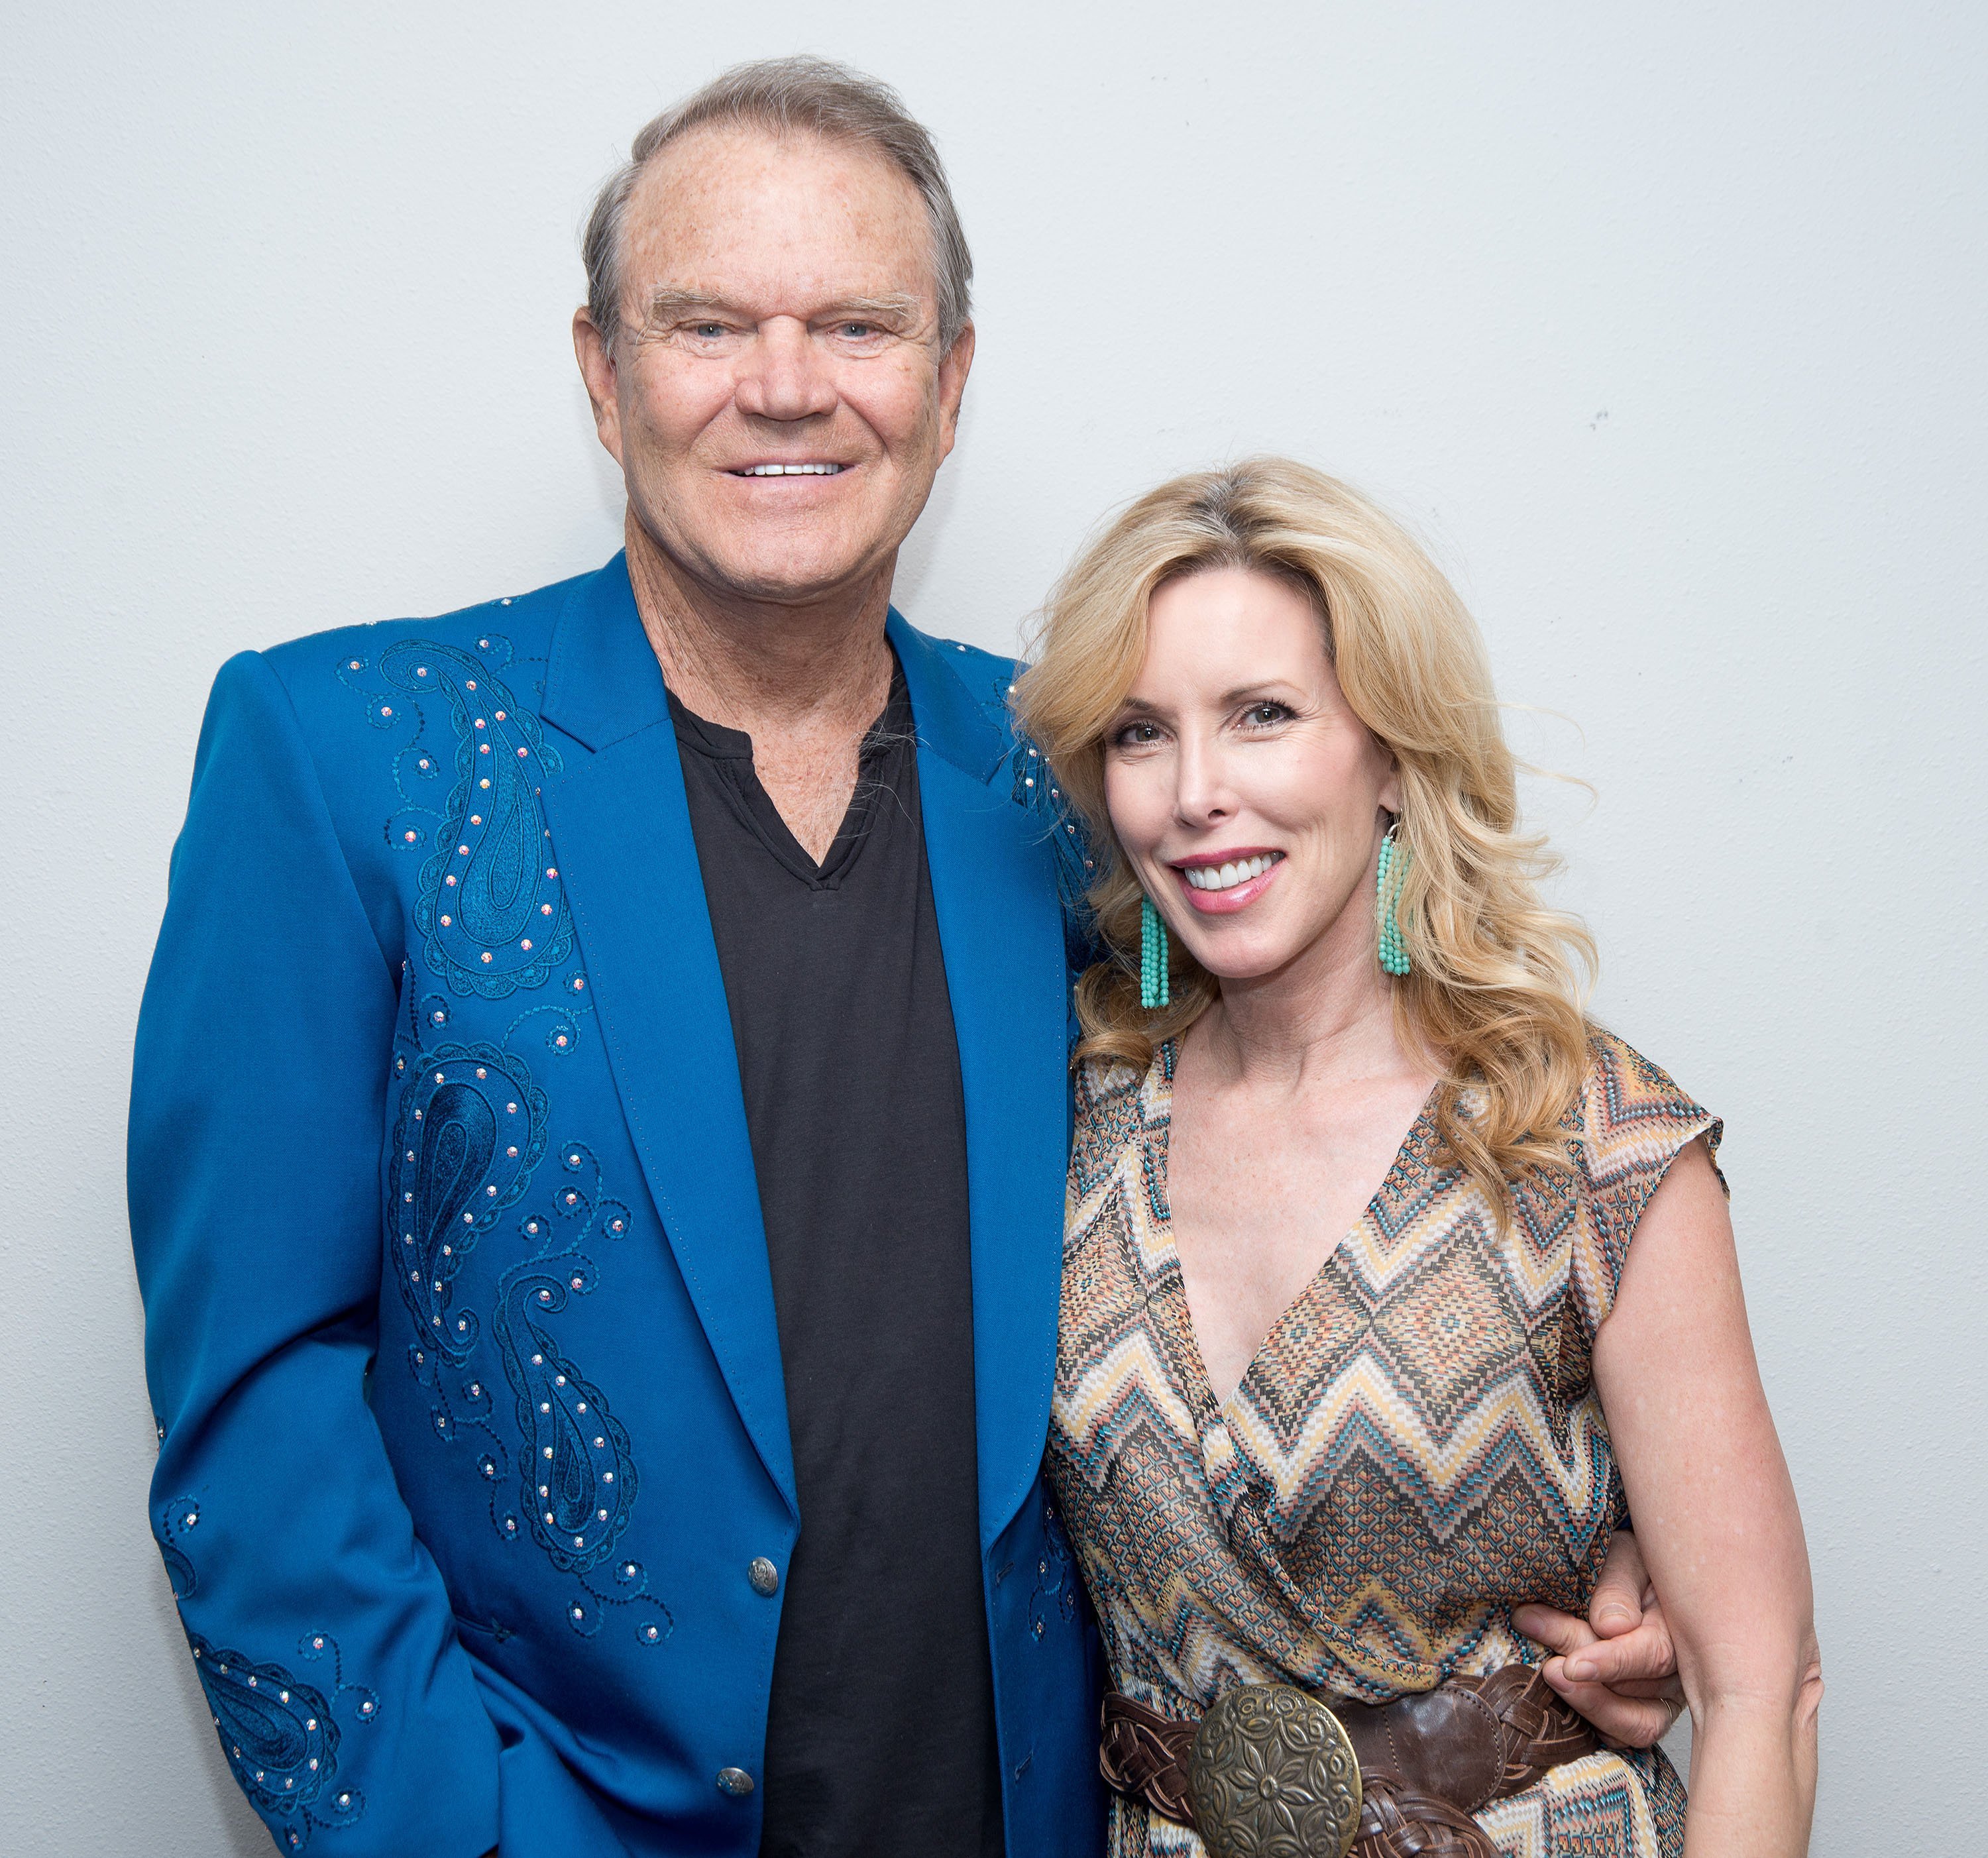 Glen Campbell & Kim following his Goodbye Tour performance in Albuquerque, New Mexico on July 29, 2012. |Photo: Getty Images